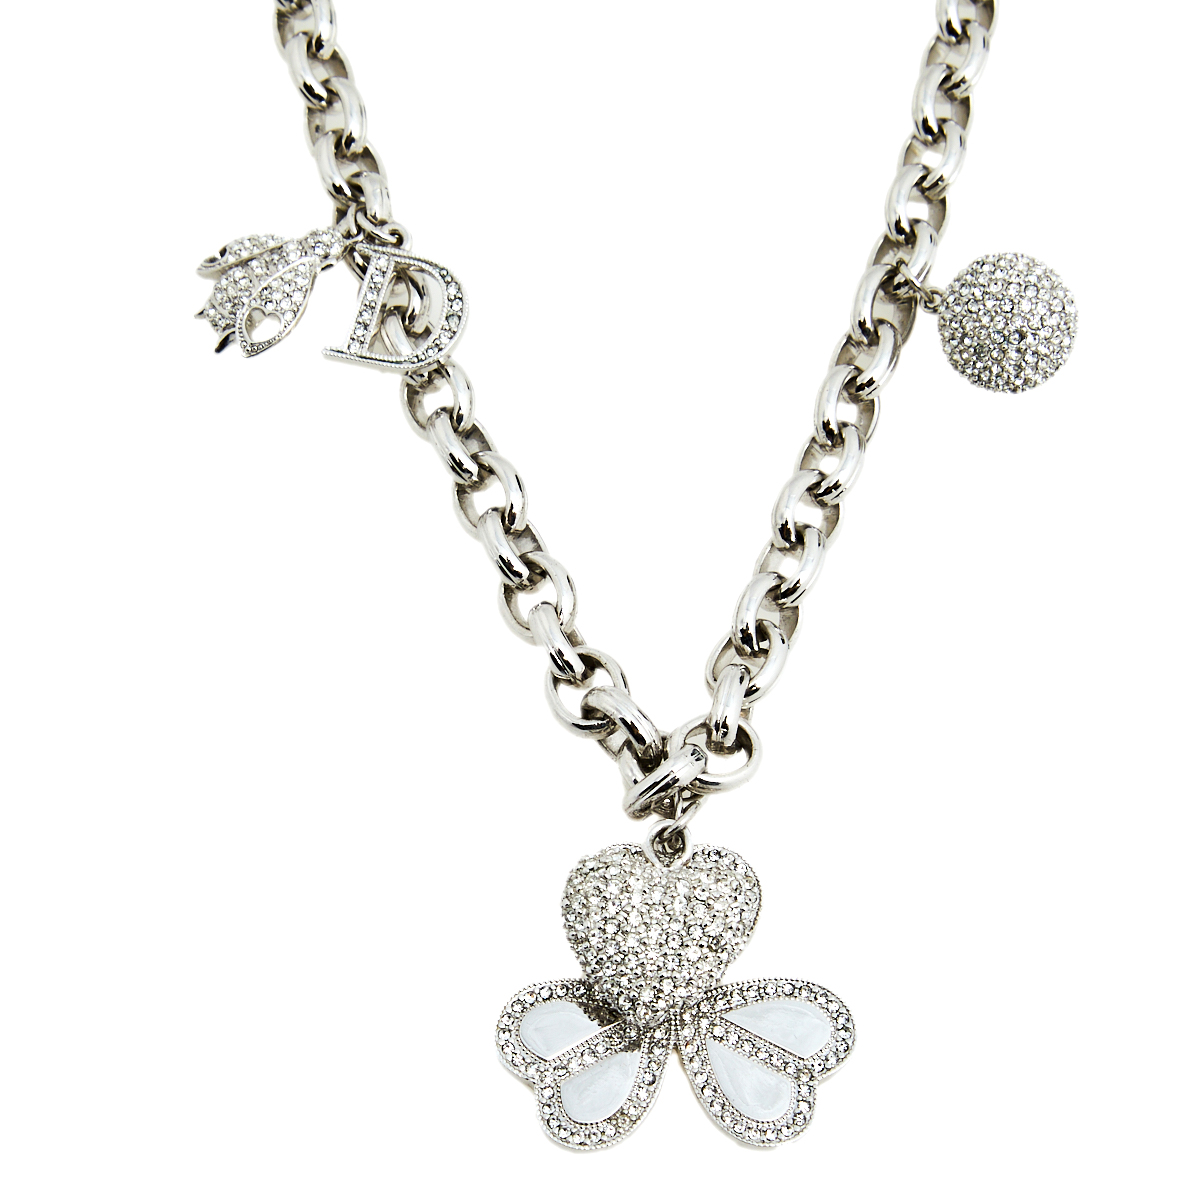 

Dior Silver Tone Crystal Embellished Charm Necklace